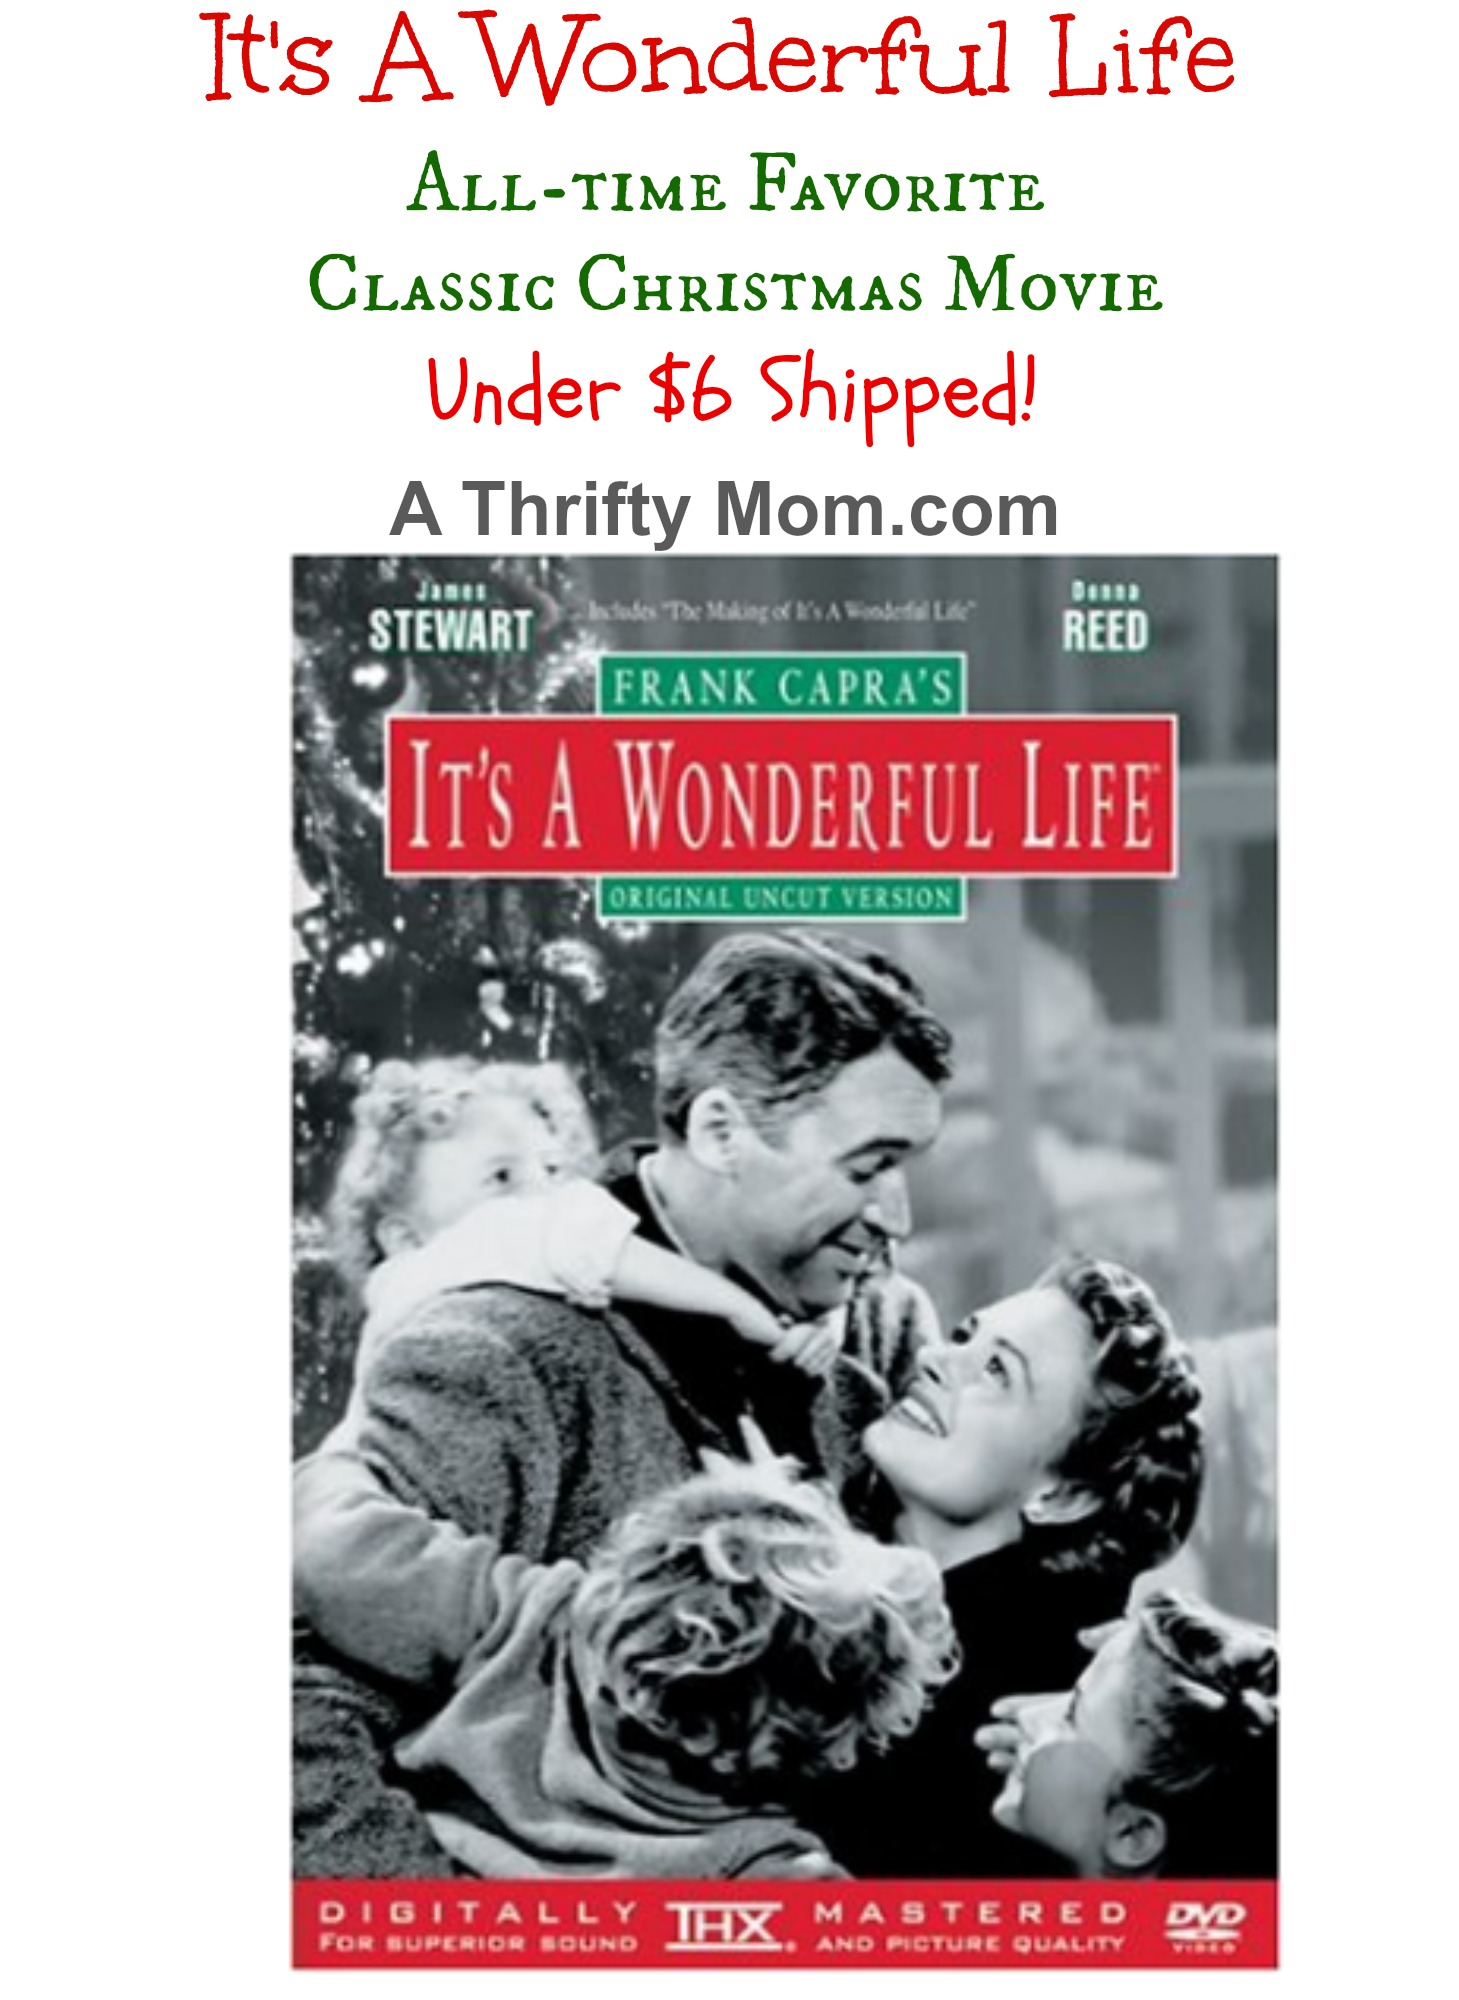 It's a Wonderful Life on DVD - Classic Christmas Movie - Buy it now under $6 shipped! #ChristmasMovies #FavoriteMovies